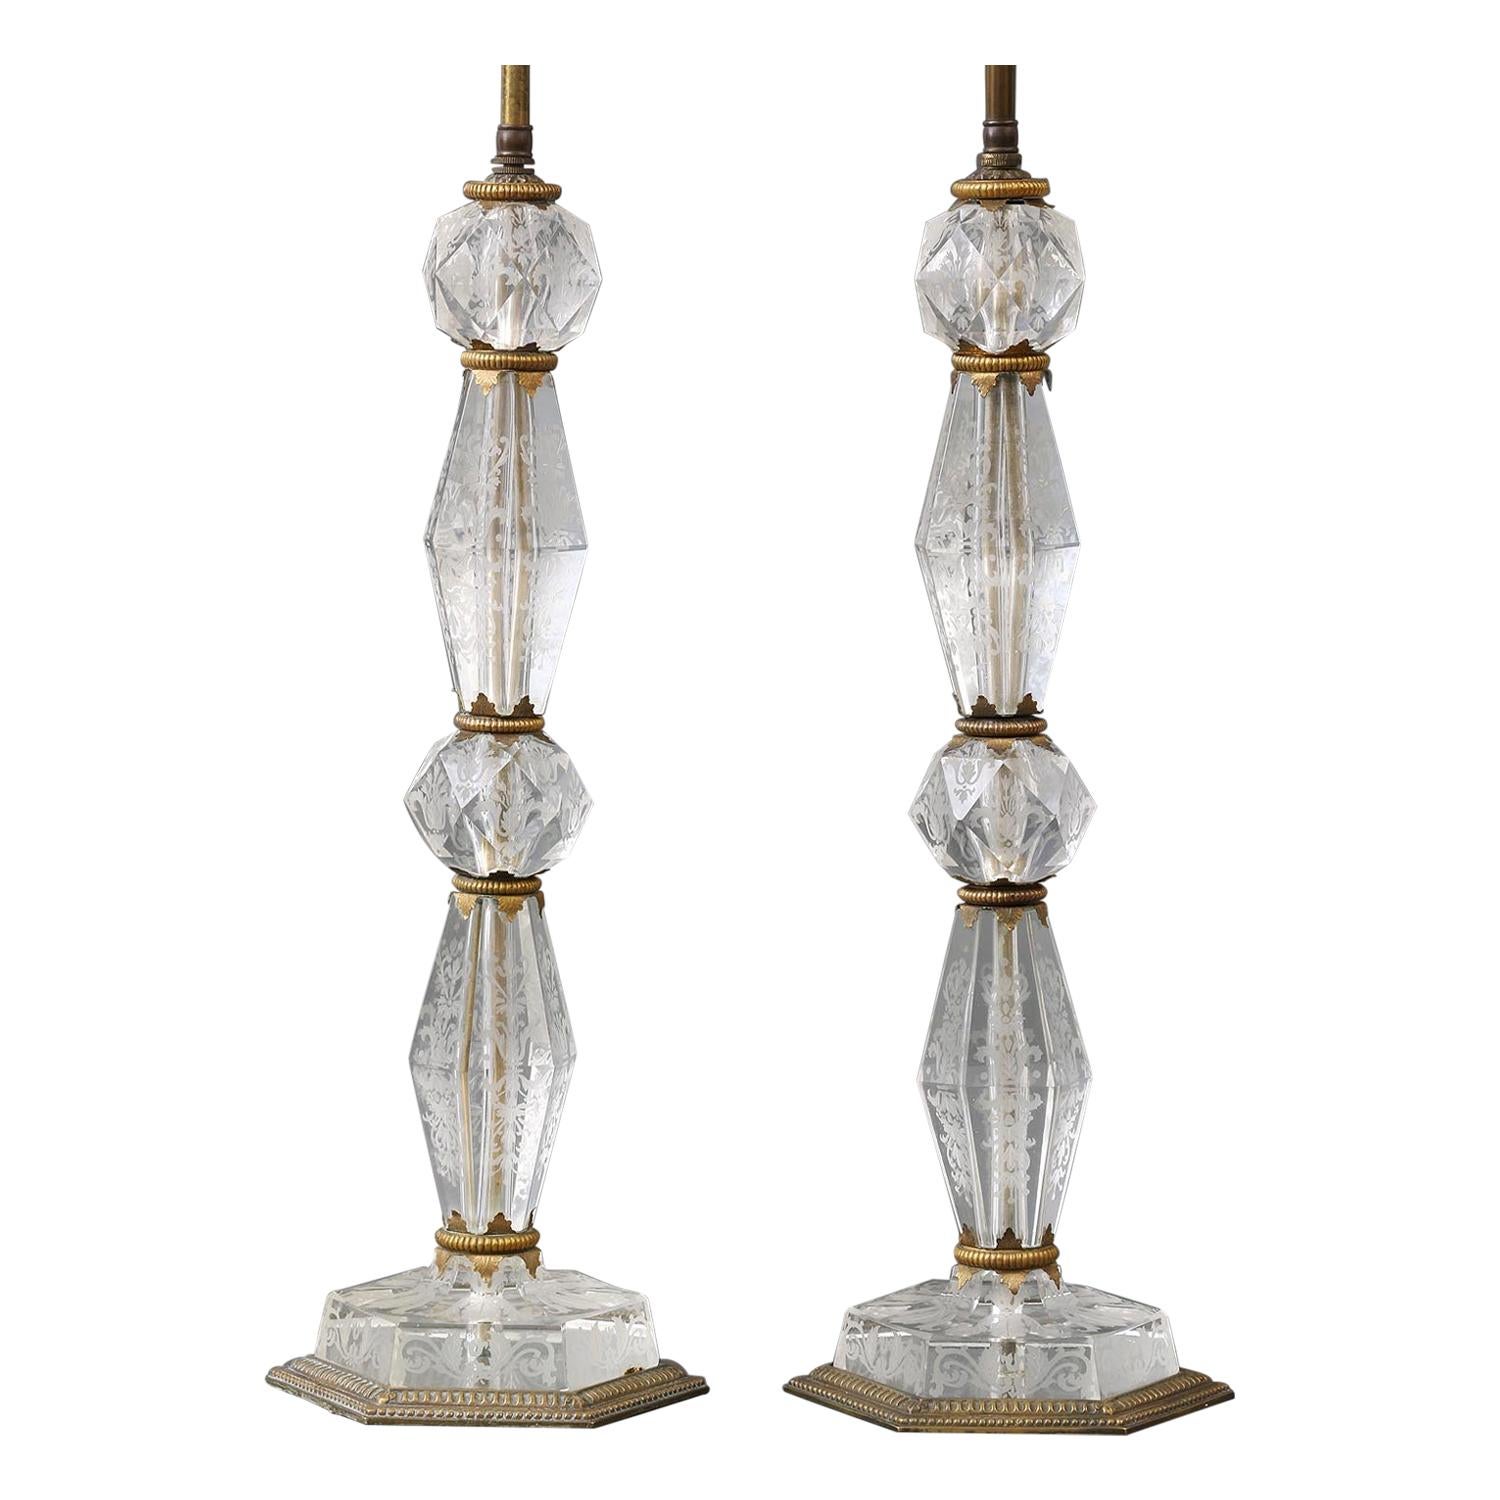 French-Cut Glass Lamps with Etched Floral Decorations